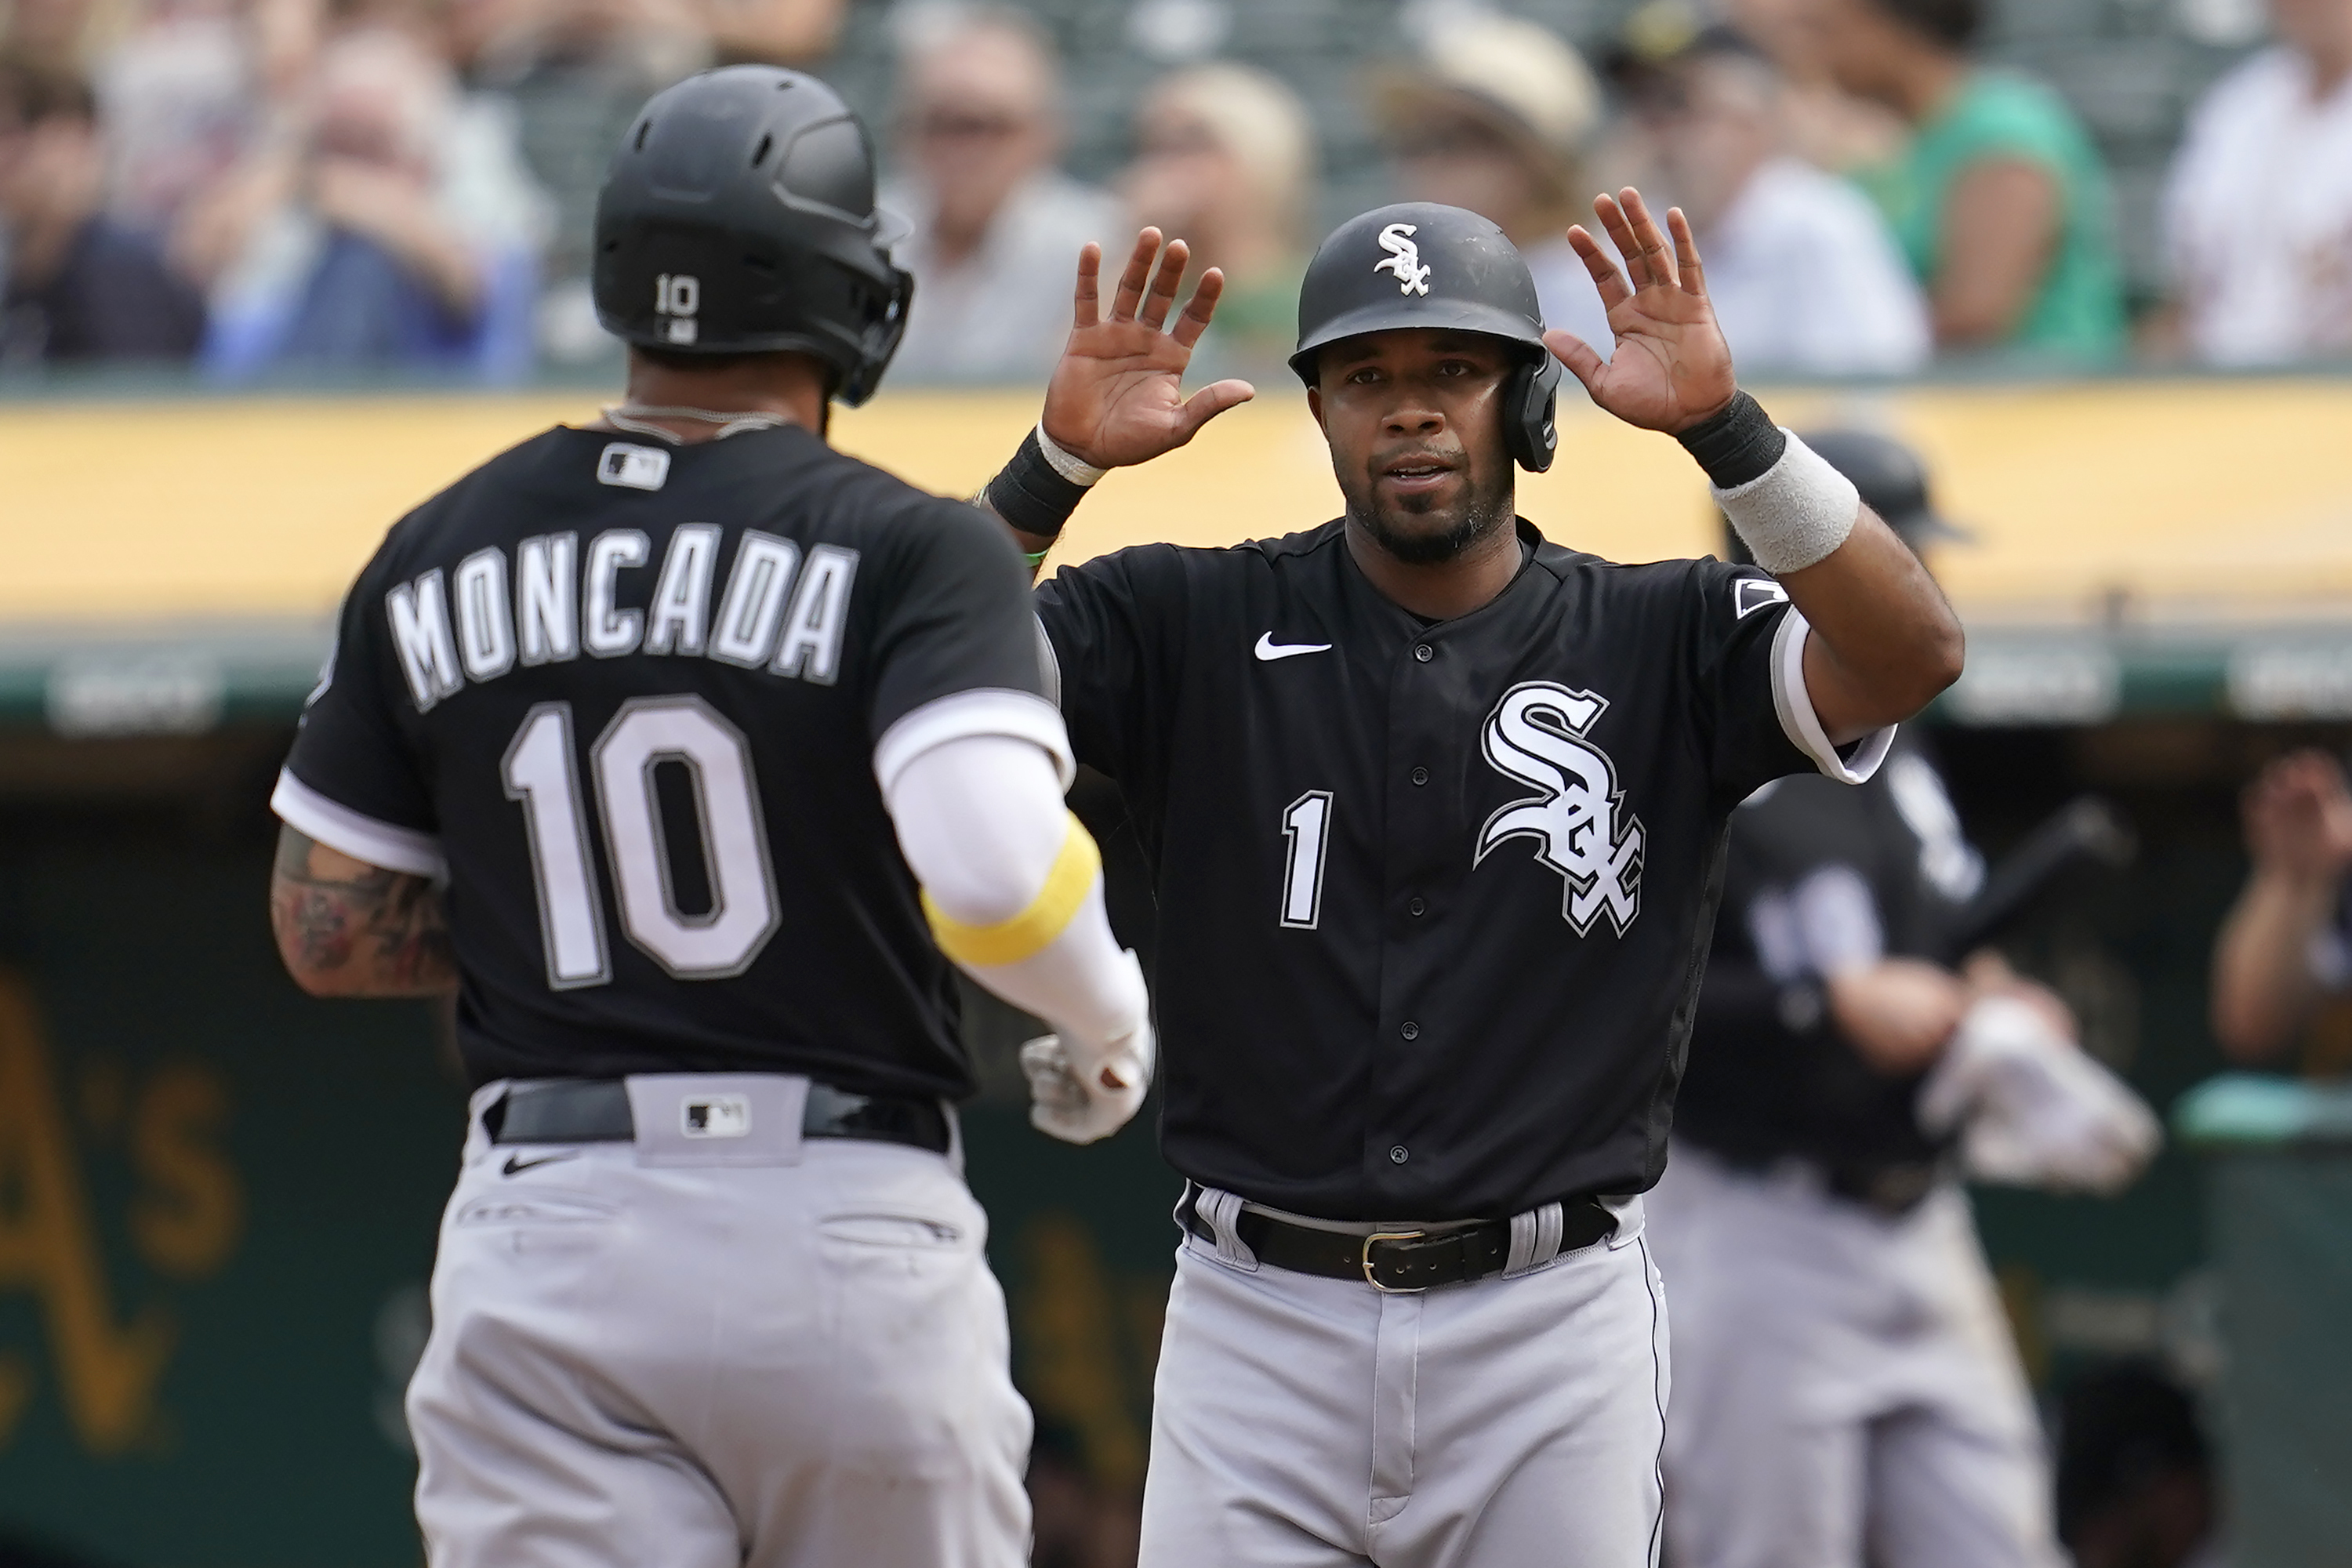 Chicago White Sox: They made it through that tough August stretch